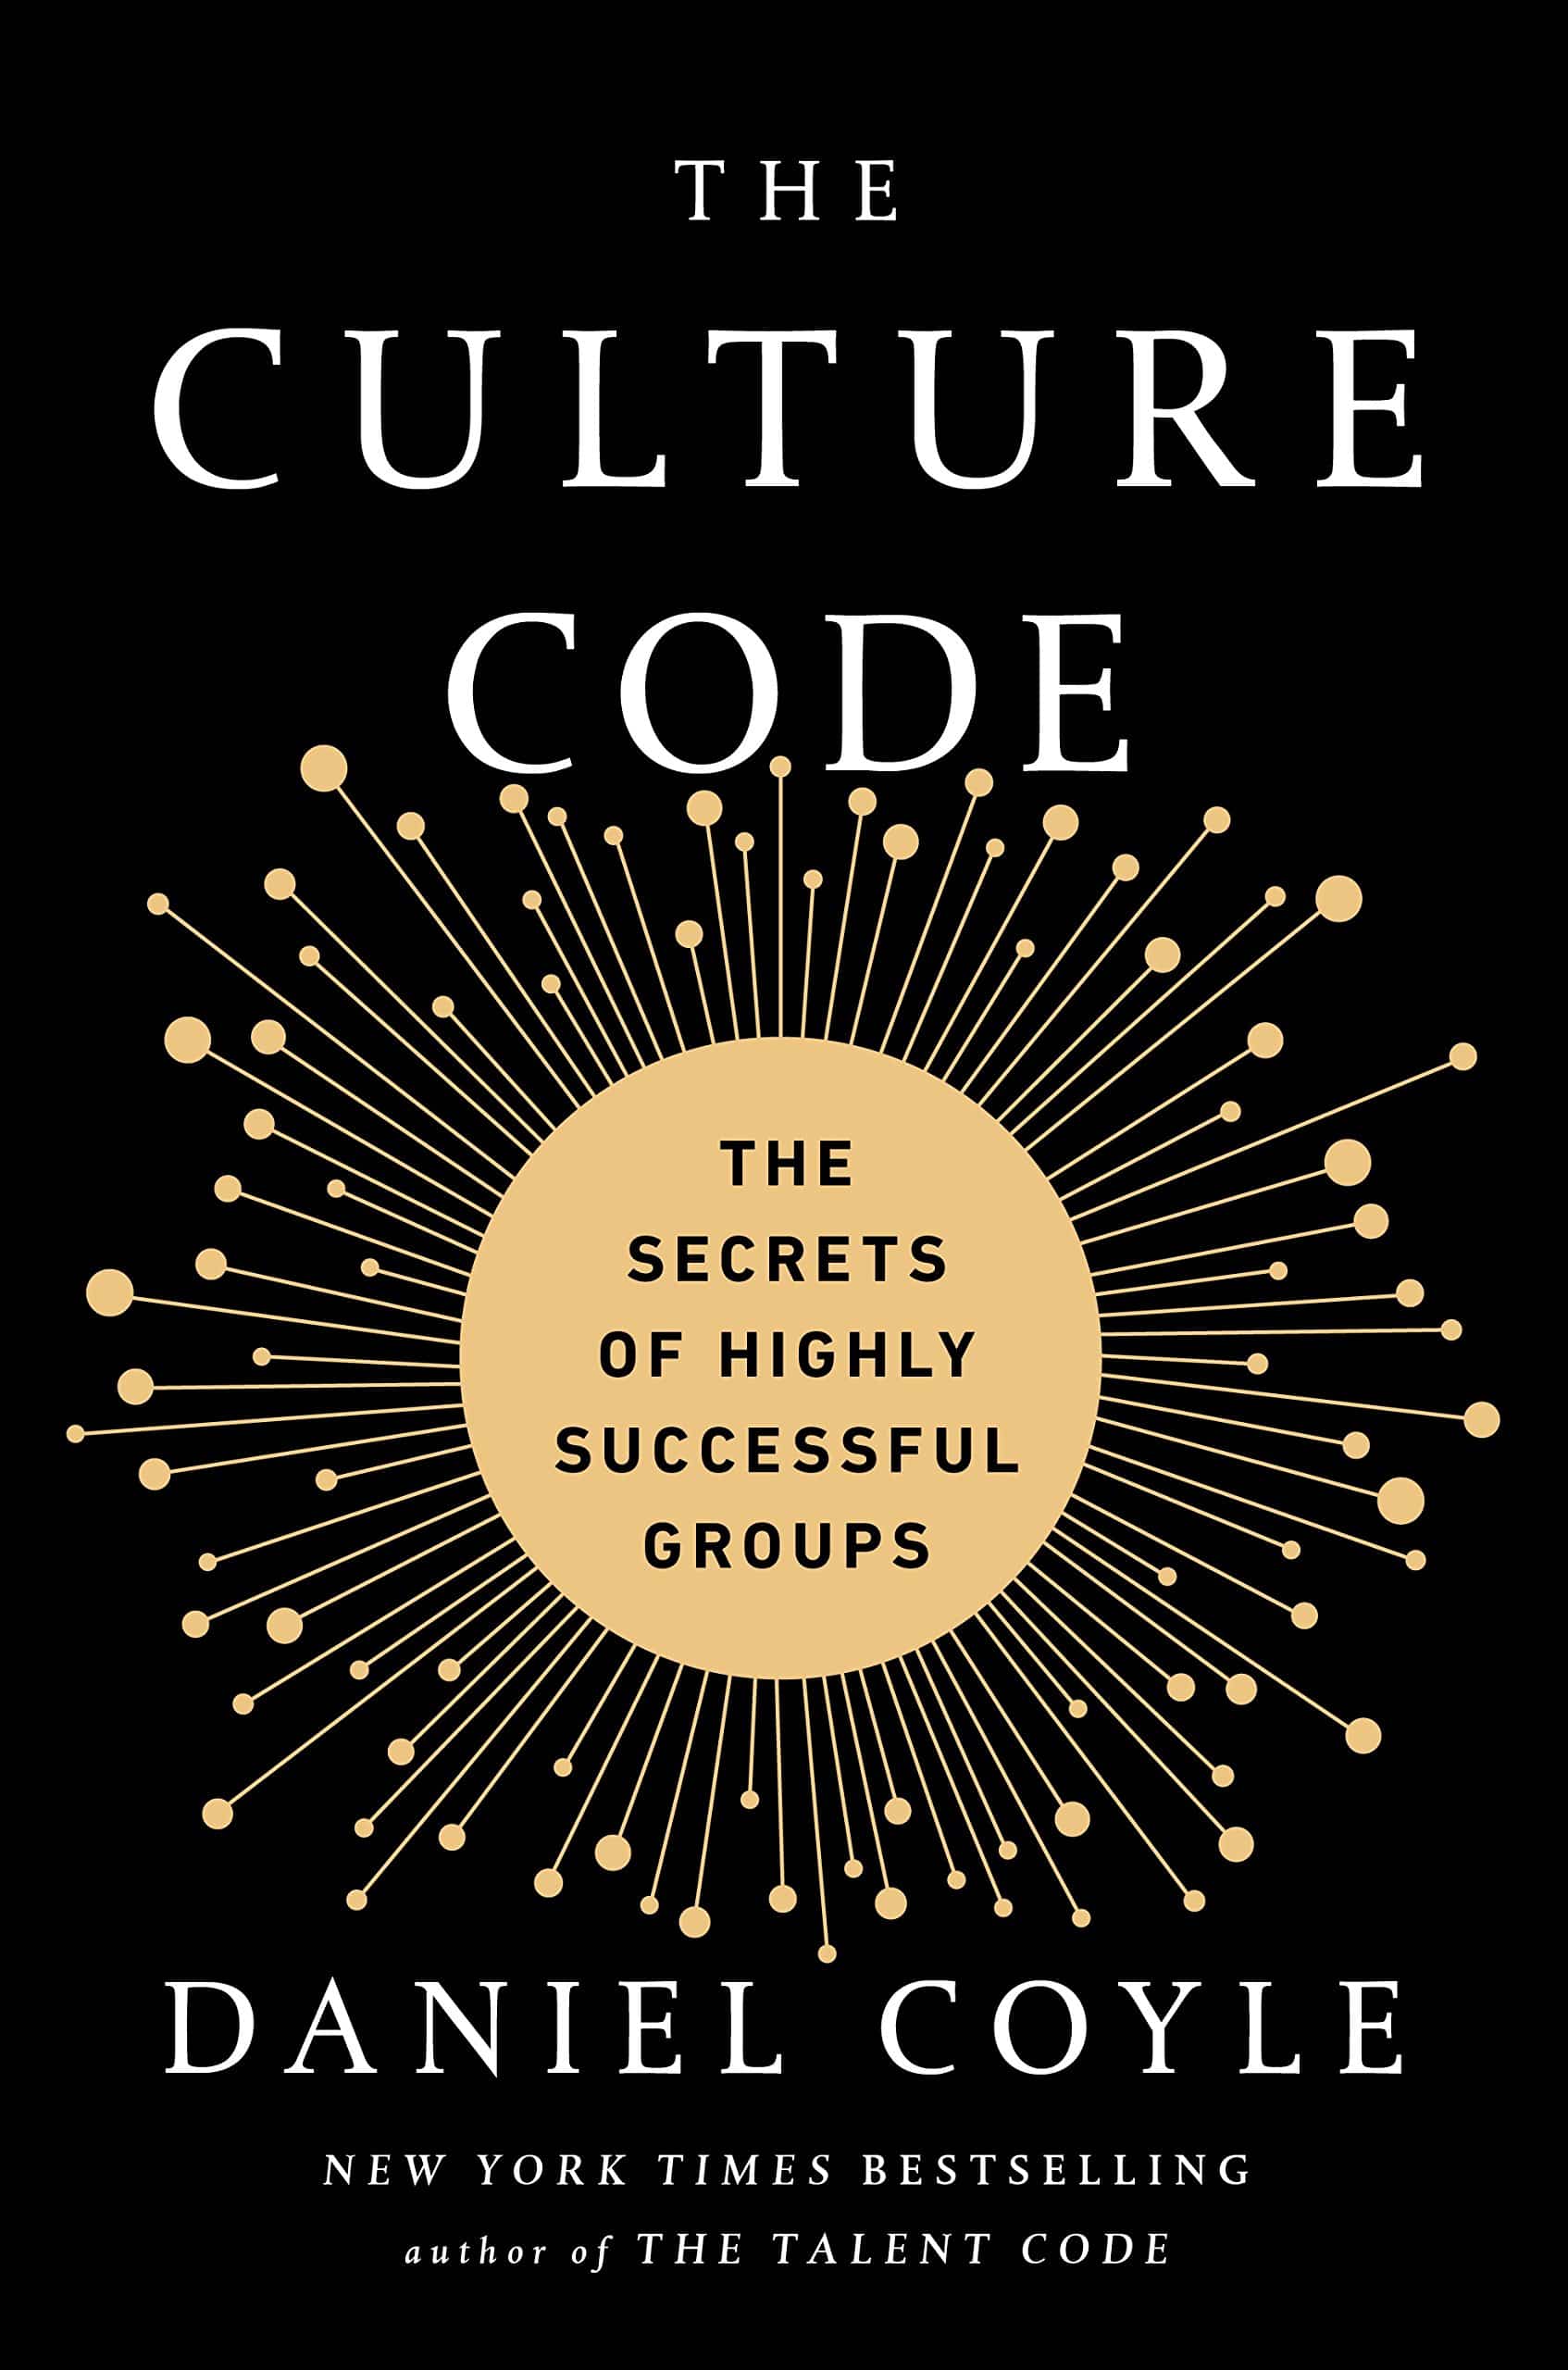 The cover of The Culture Code